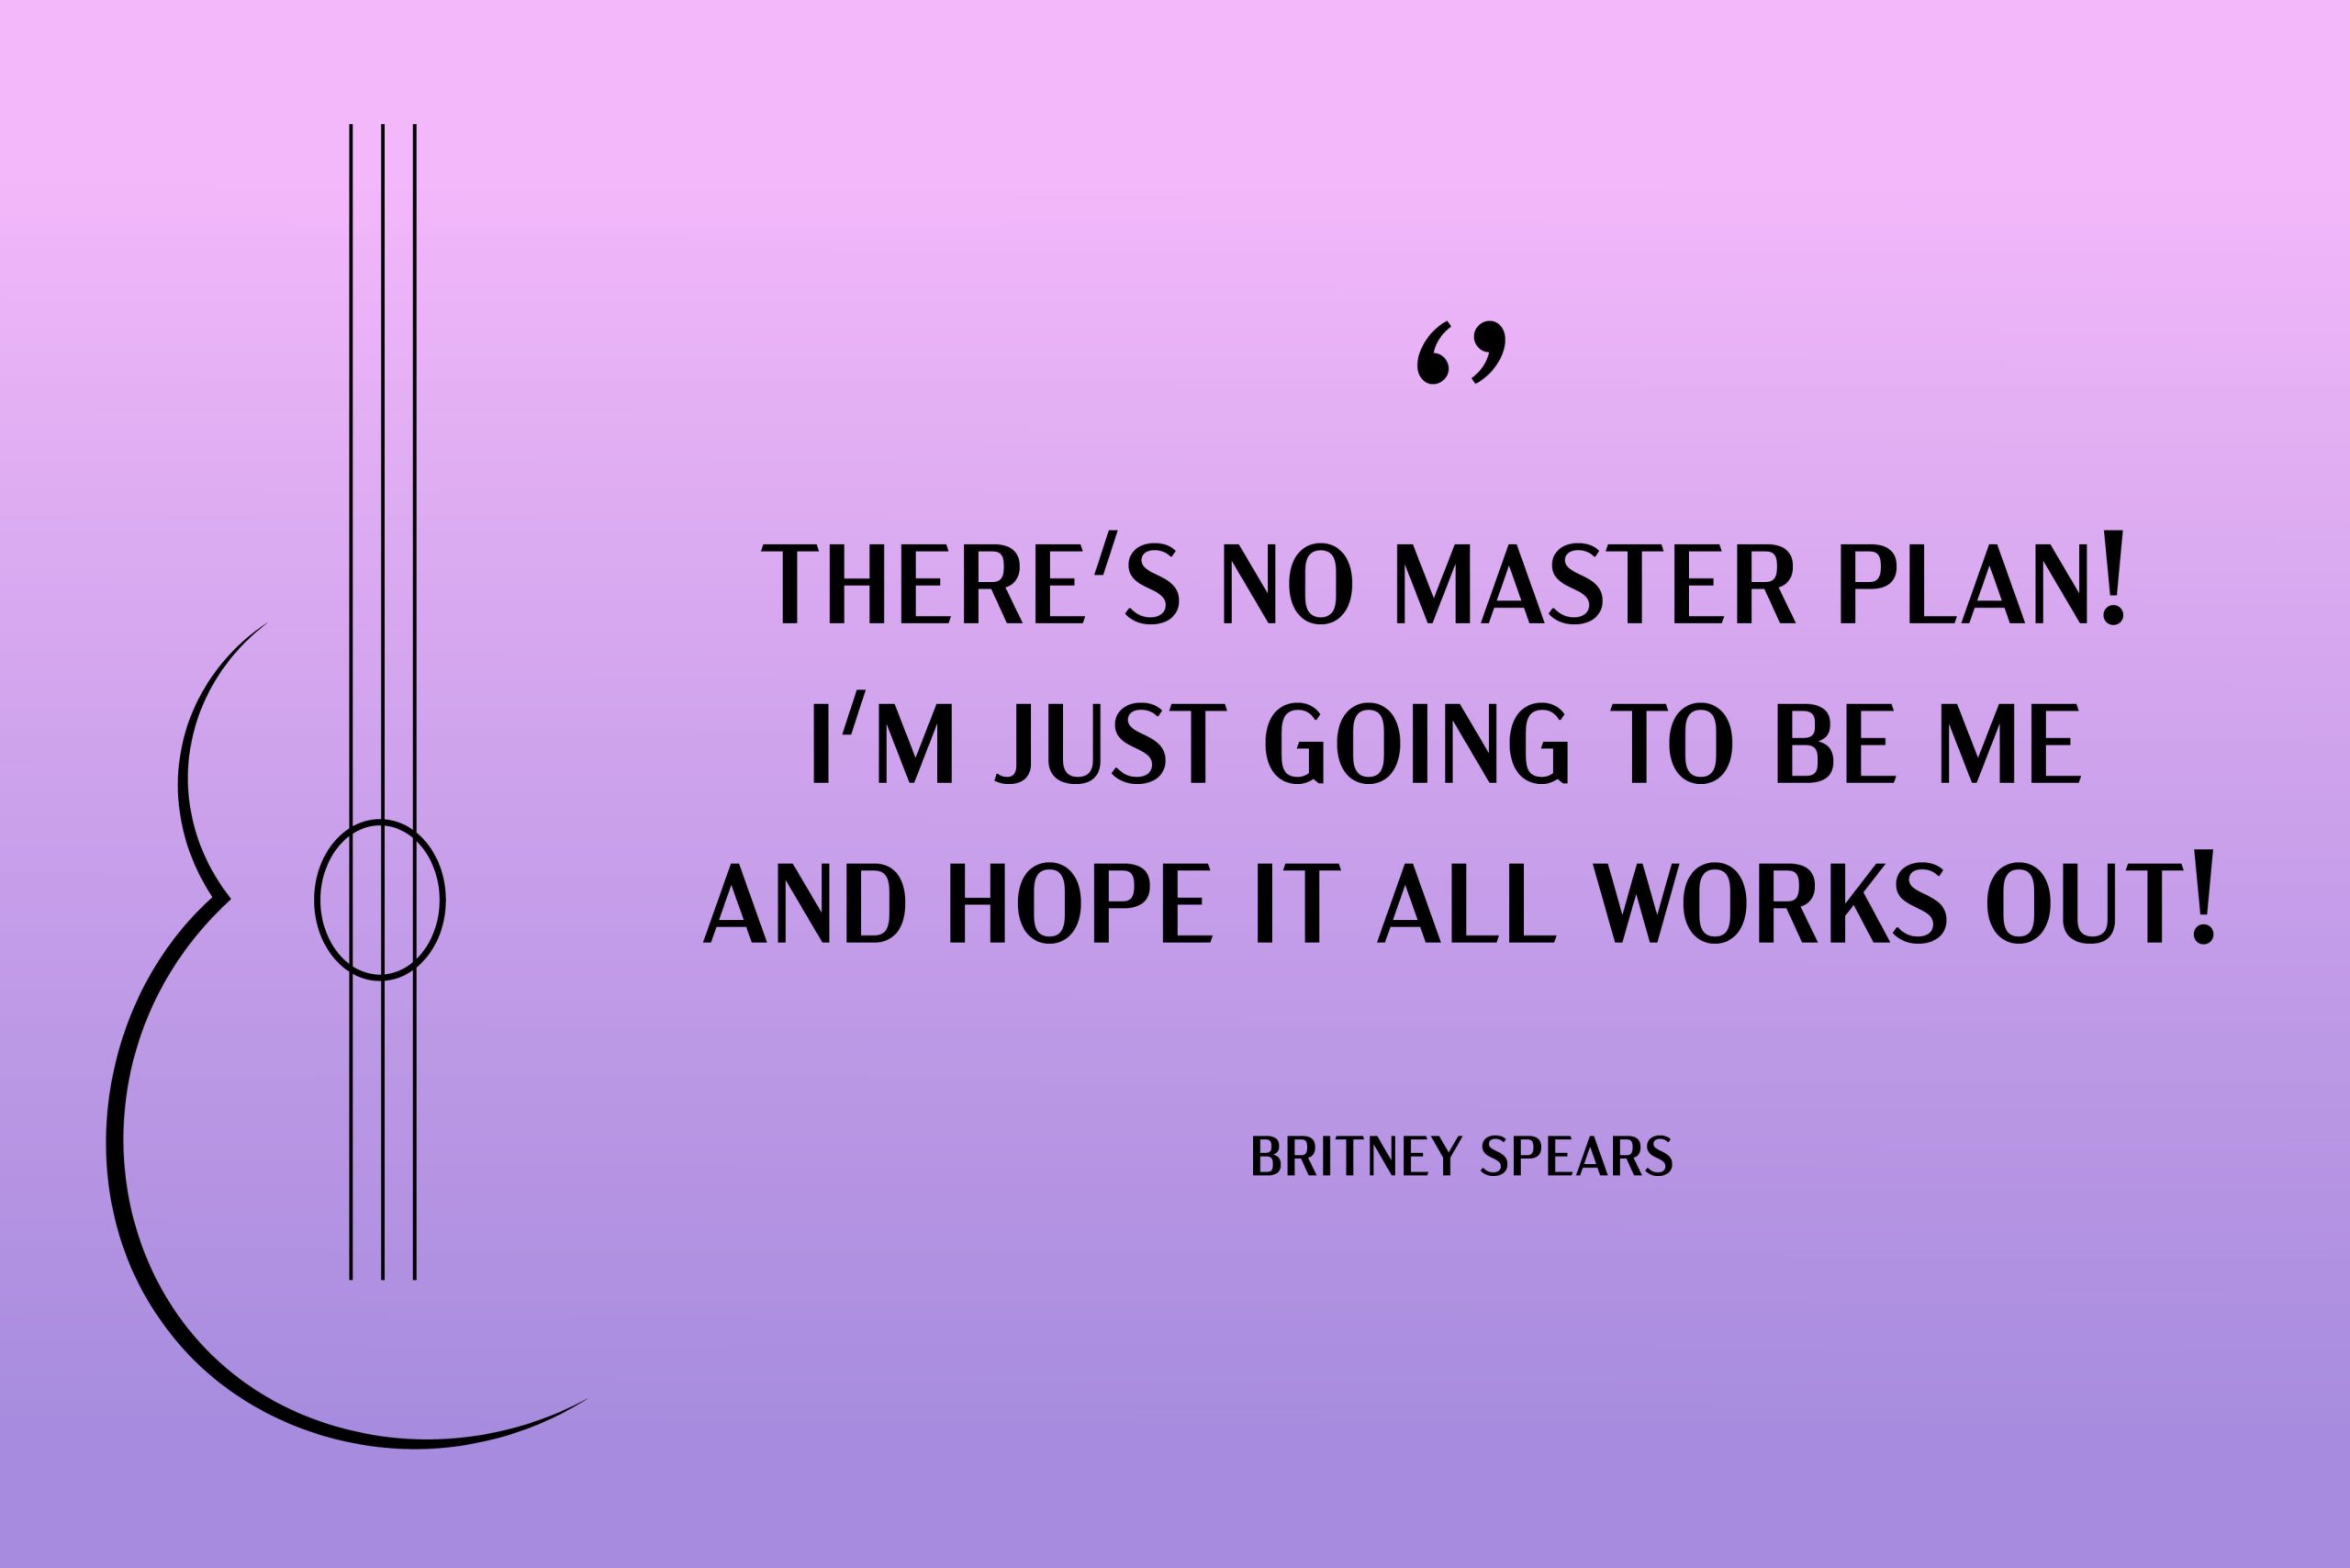 “There's no master plan! I'm just going to be me and hope it all works out!” Britney Spears